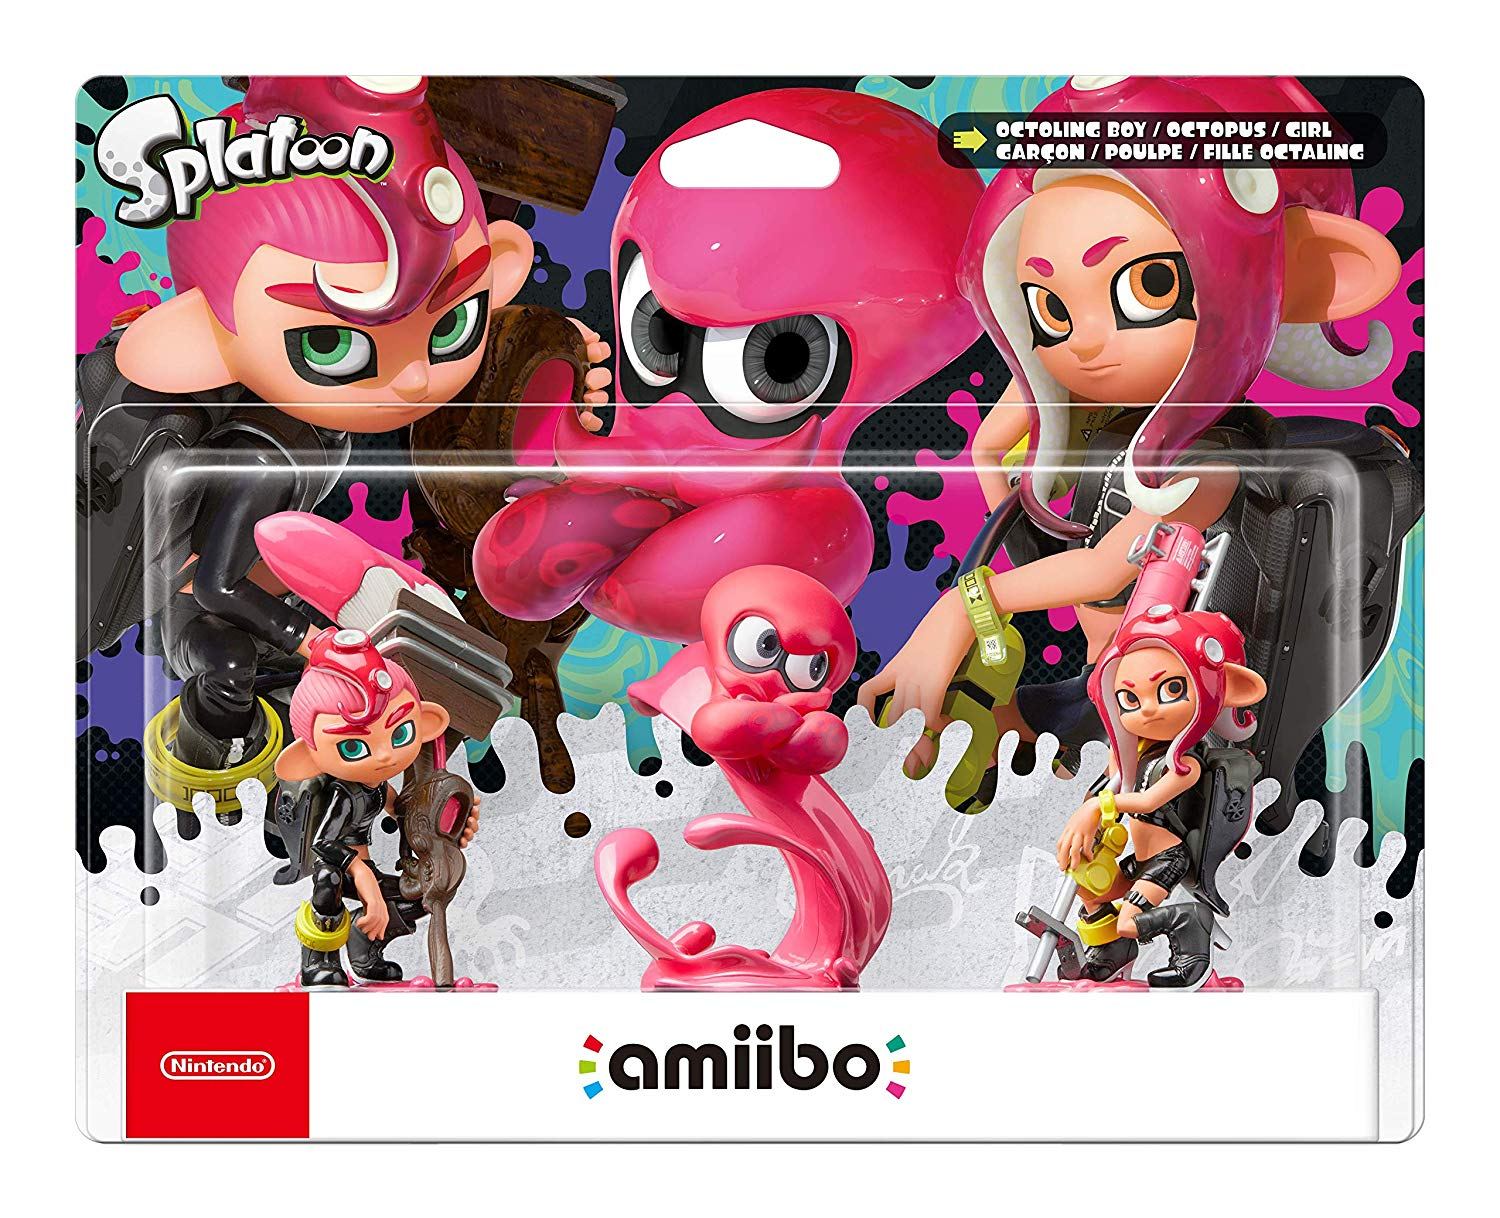 amiibo Splatoon 3 Series Figure (Inkling Yellow) for Wii U, New 3DS, New  3DS LL / XL, SW